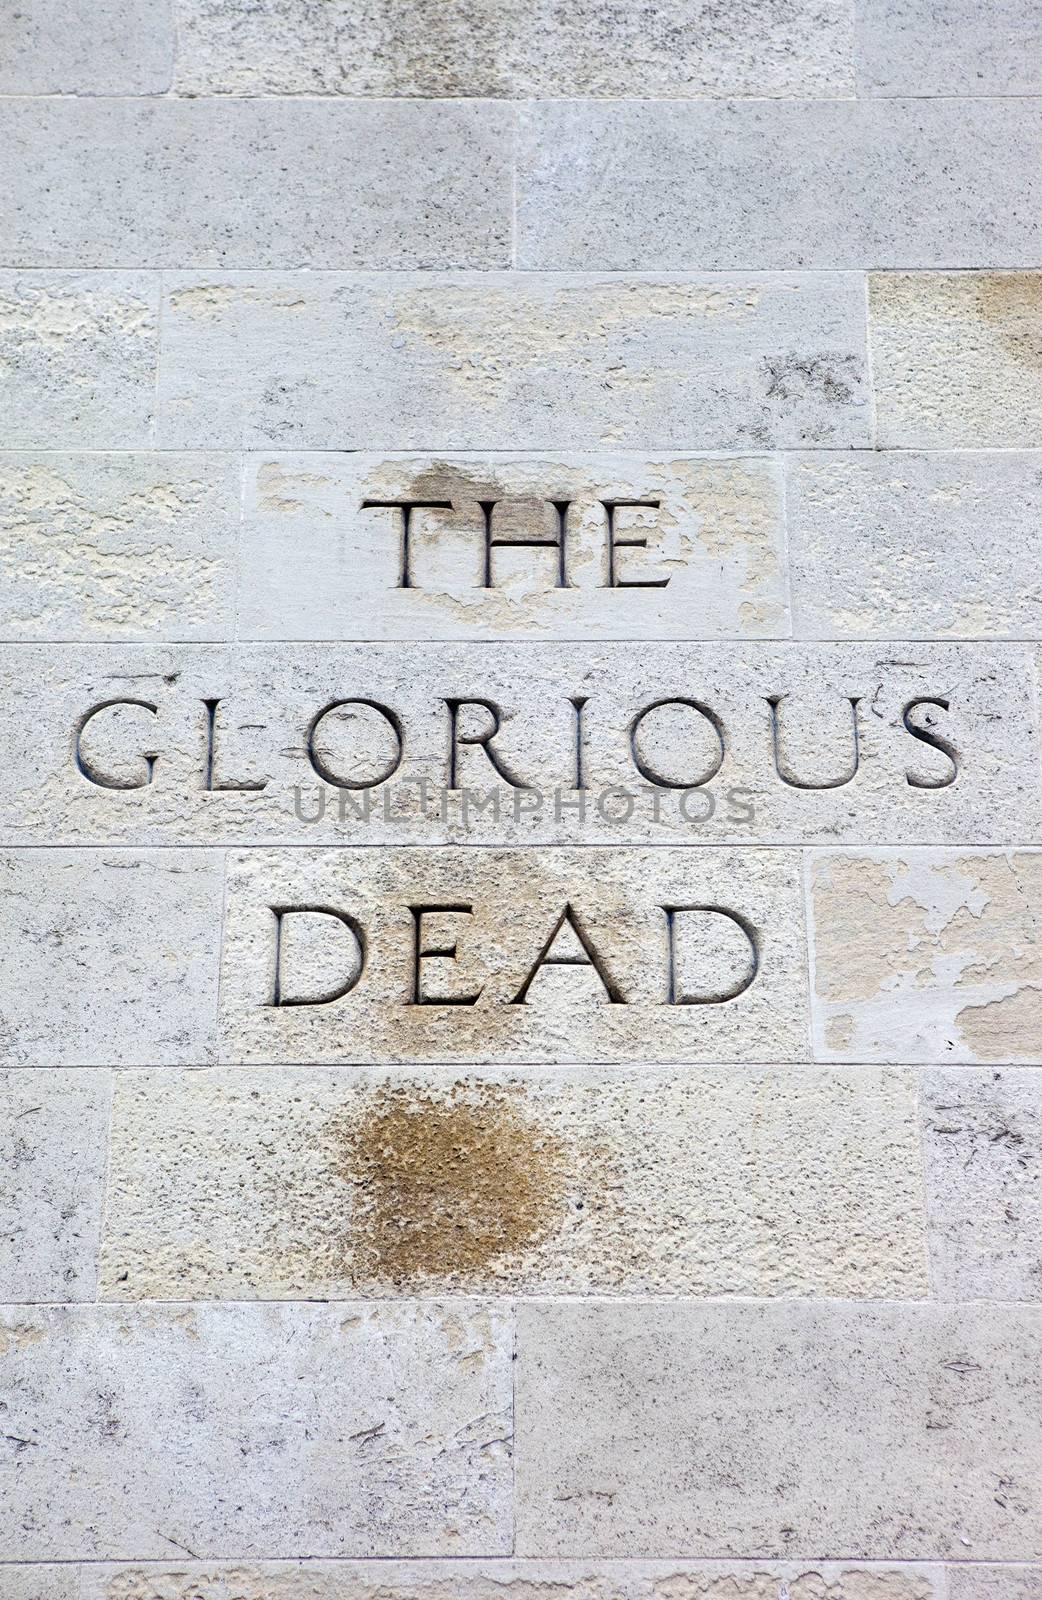 The Glorious Dead Inscription on the Cenotaph War Memorial in London.